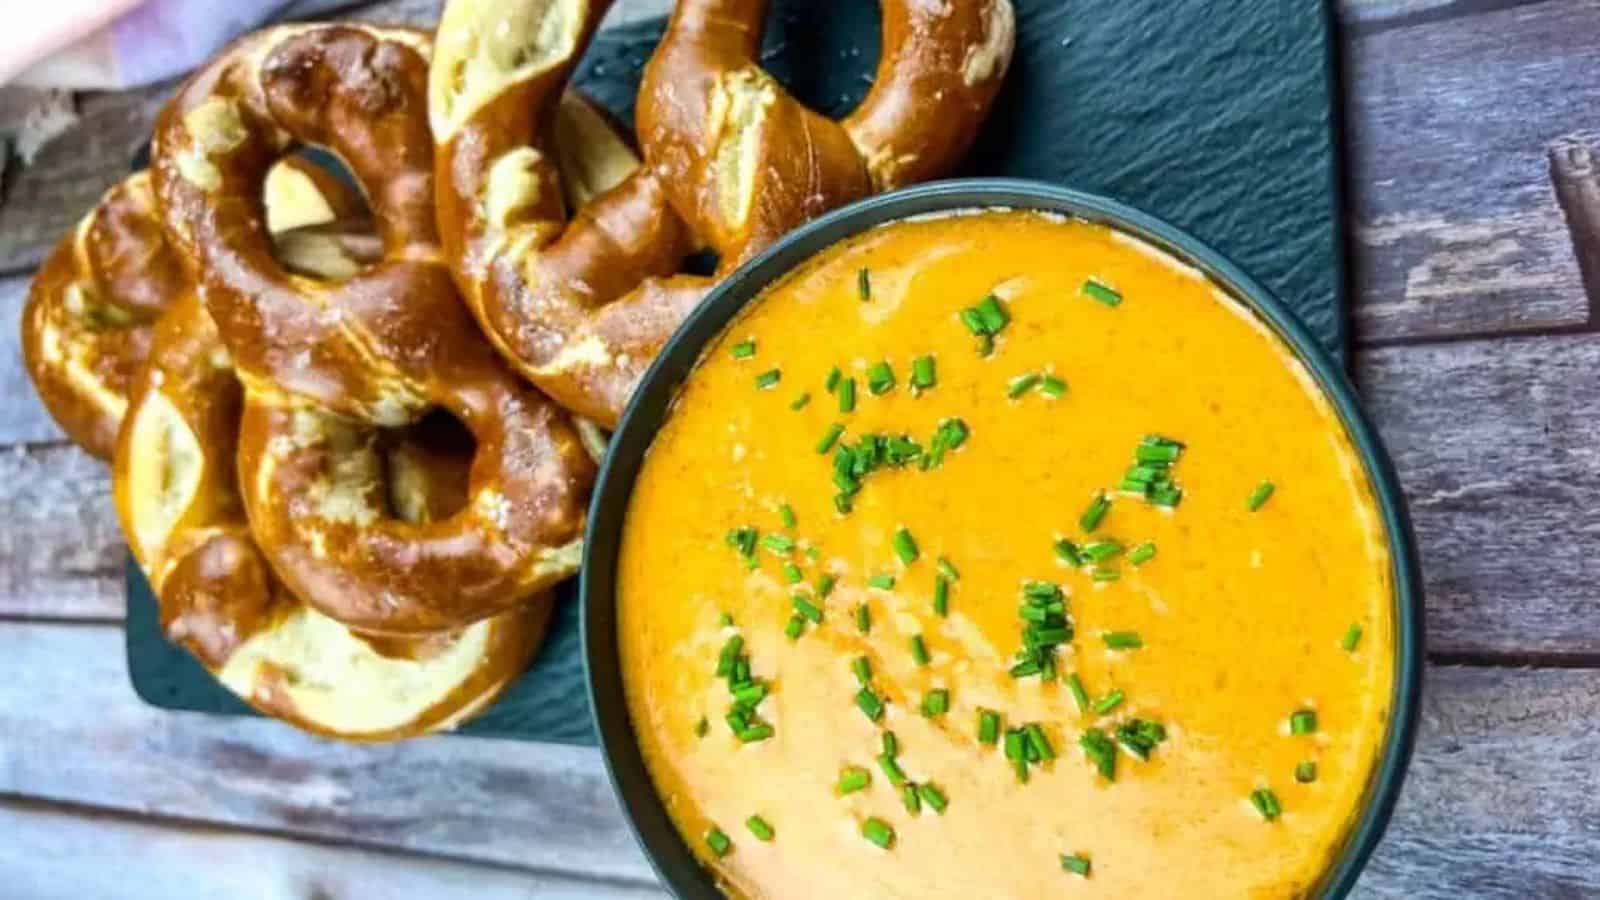 Overhead image of Guinness cheese dip in a bowl with a couple of pretzels in the background.